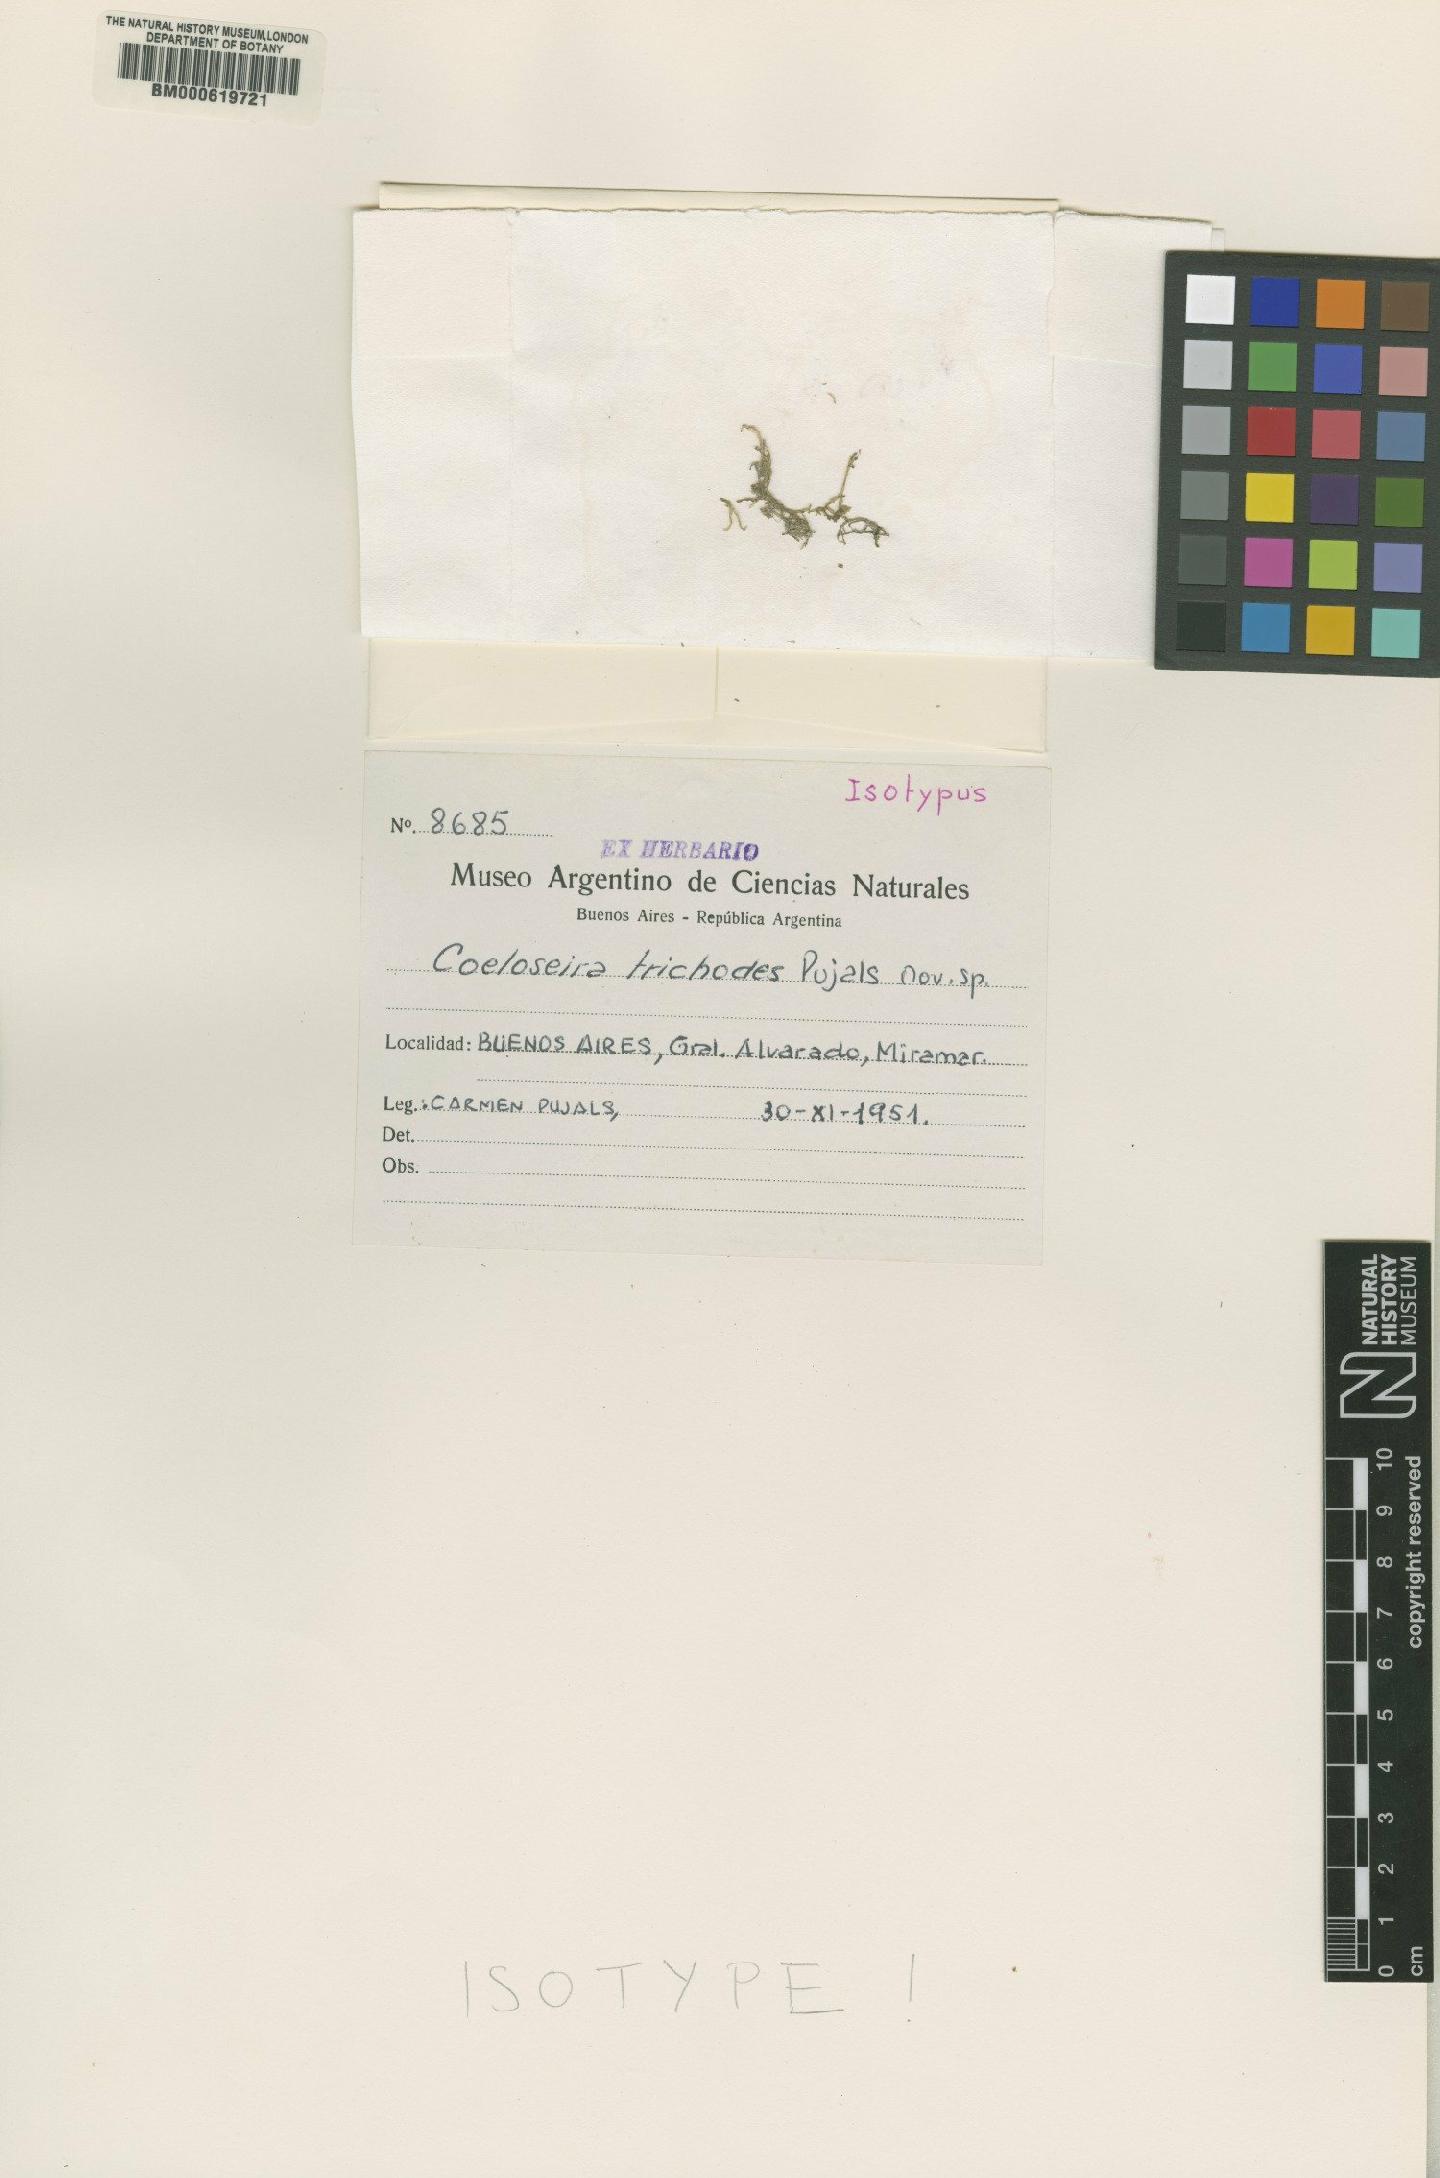 To NHMUK collection (Coeloseira trichodes Pujals; Isotype; NHMUK:ecatalogue:4791883)